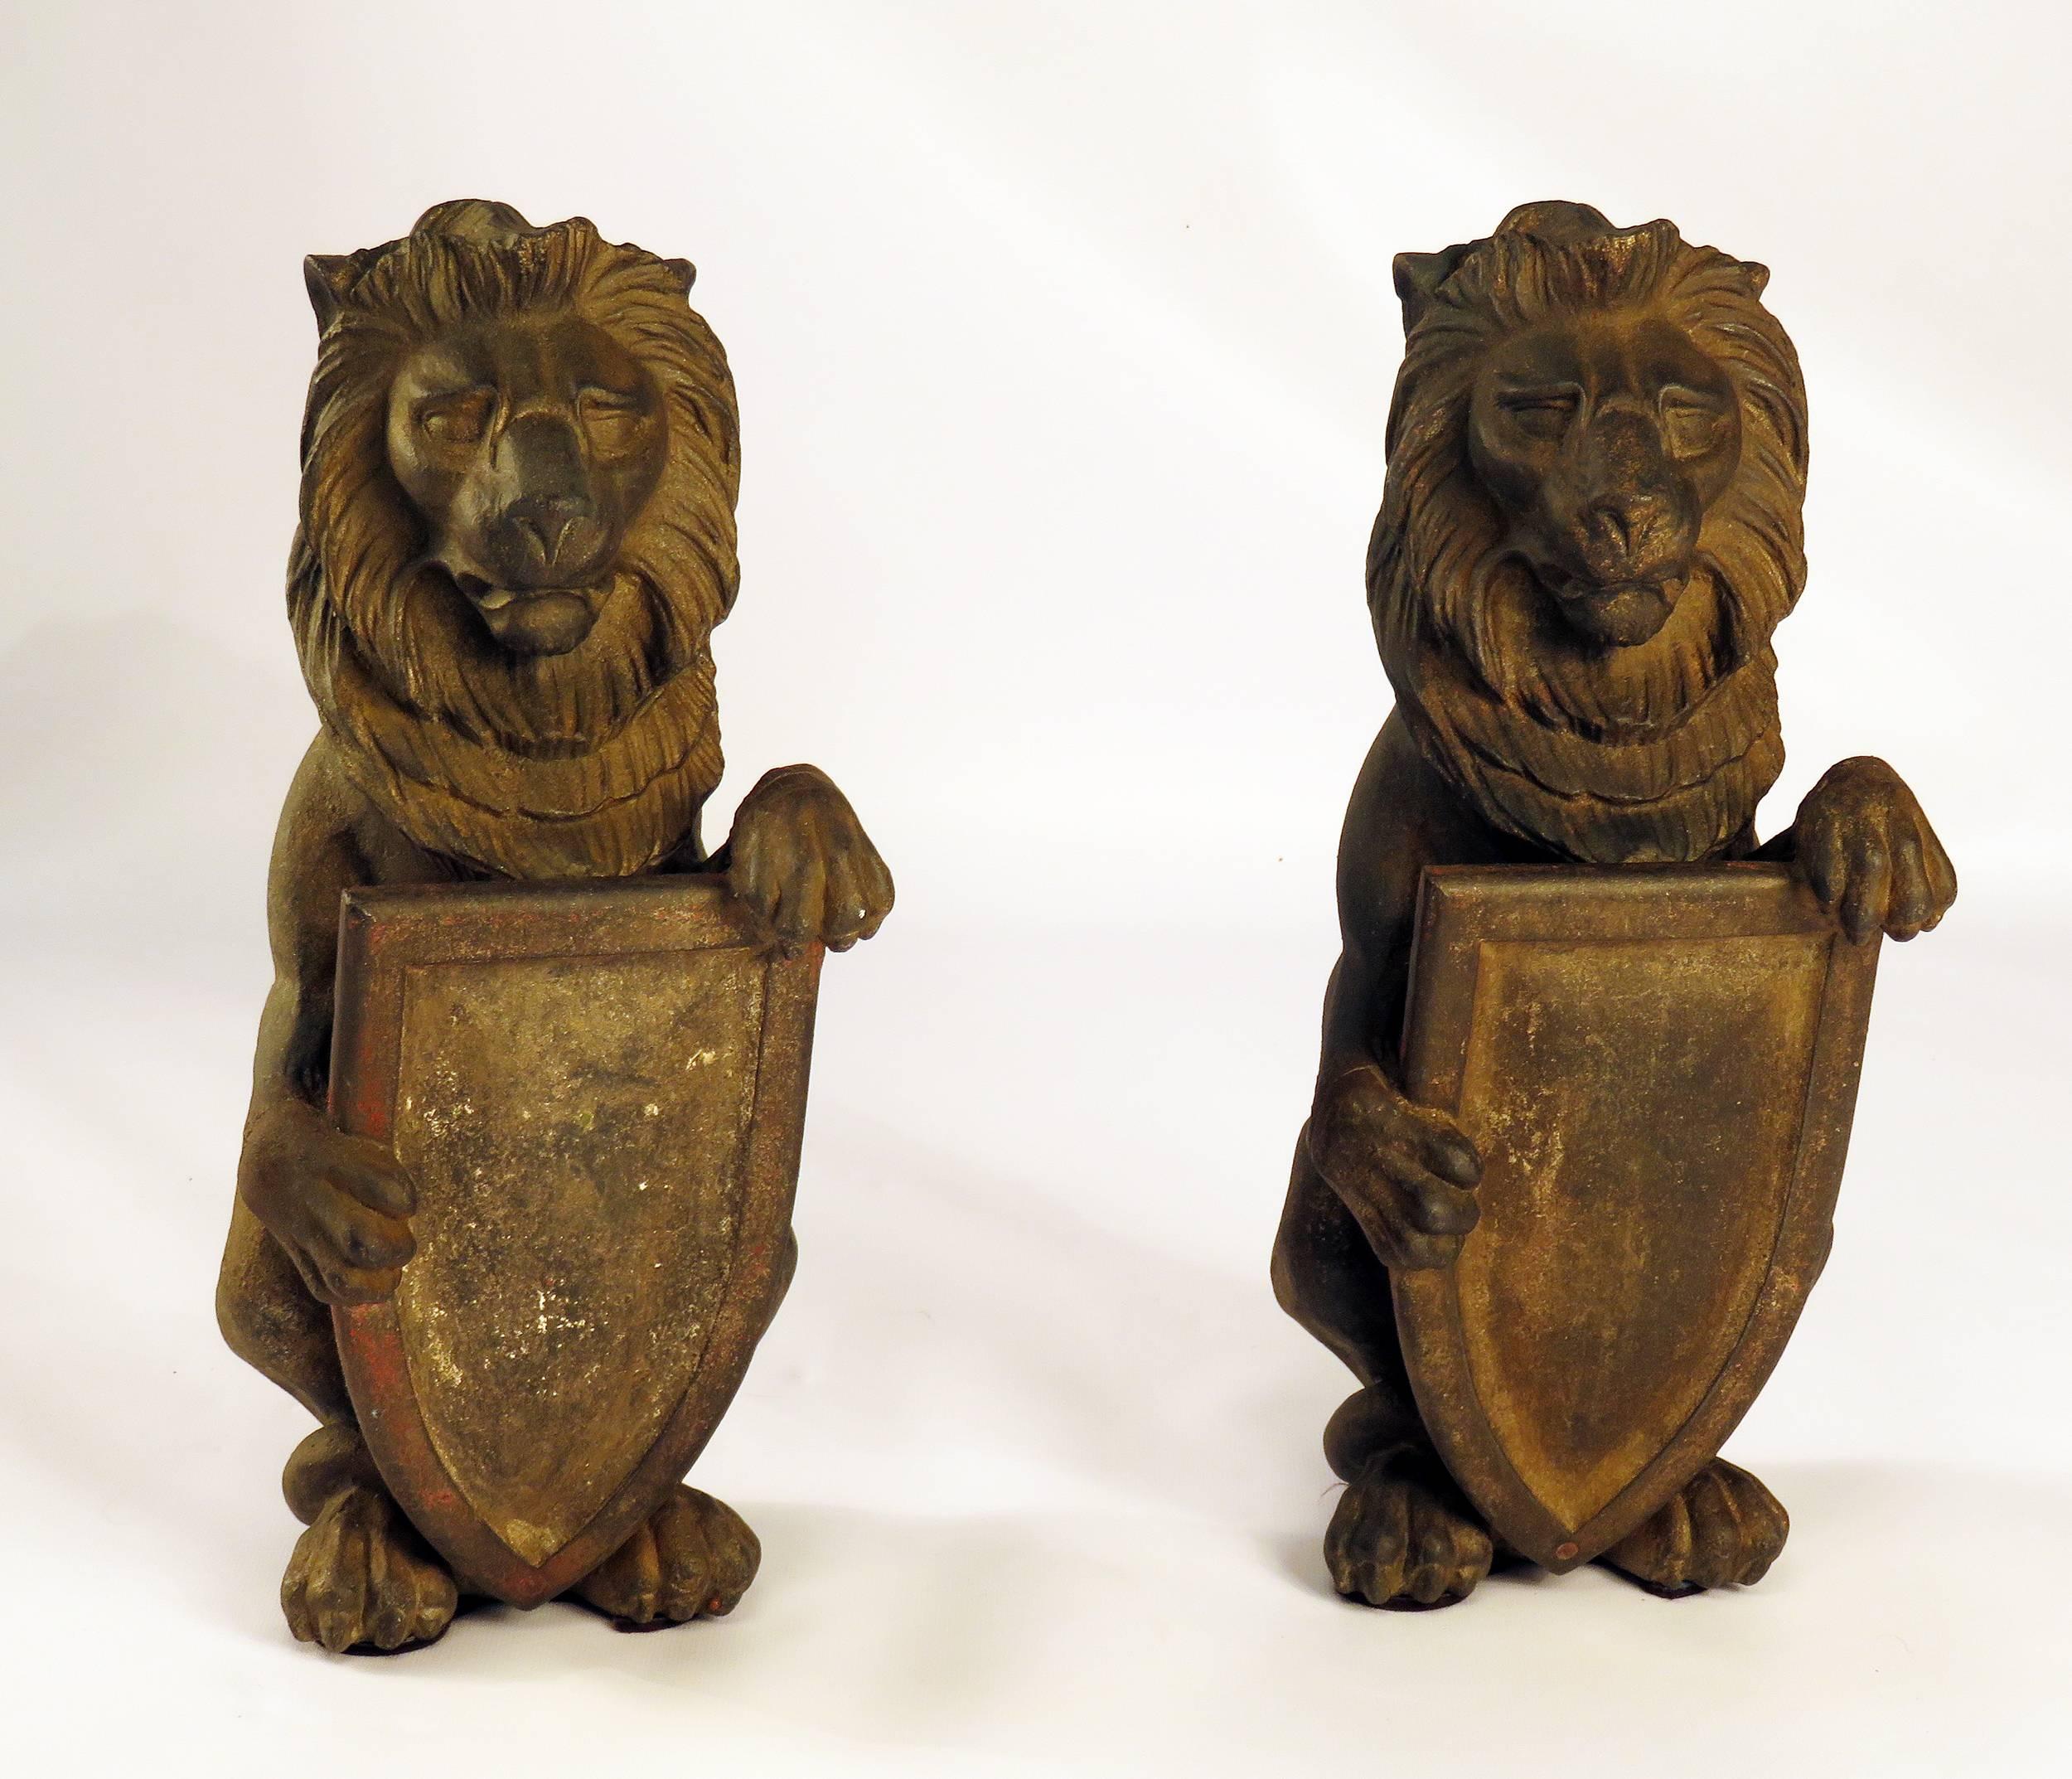 A pair of cast iron lions holding shields with traces of old paint. We believe these come from England and are Edwardian. Possibly gate post finials or andirons. Great decoration.